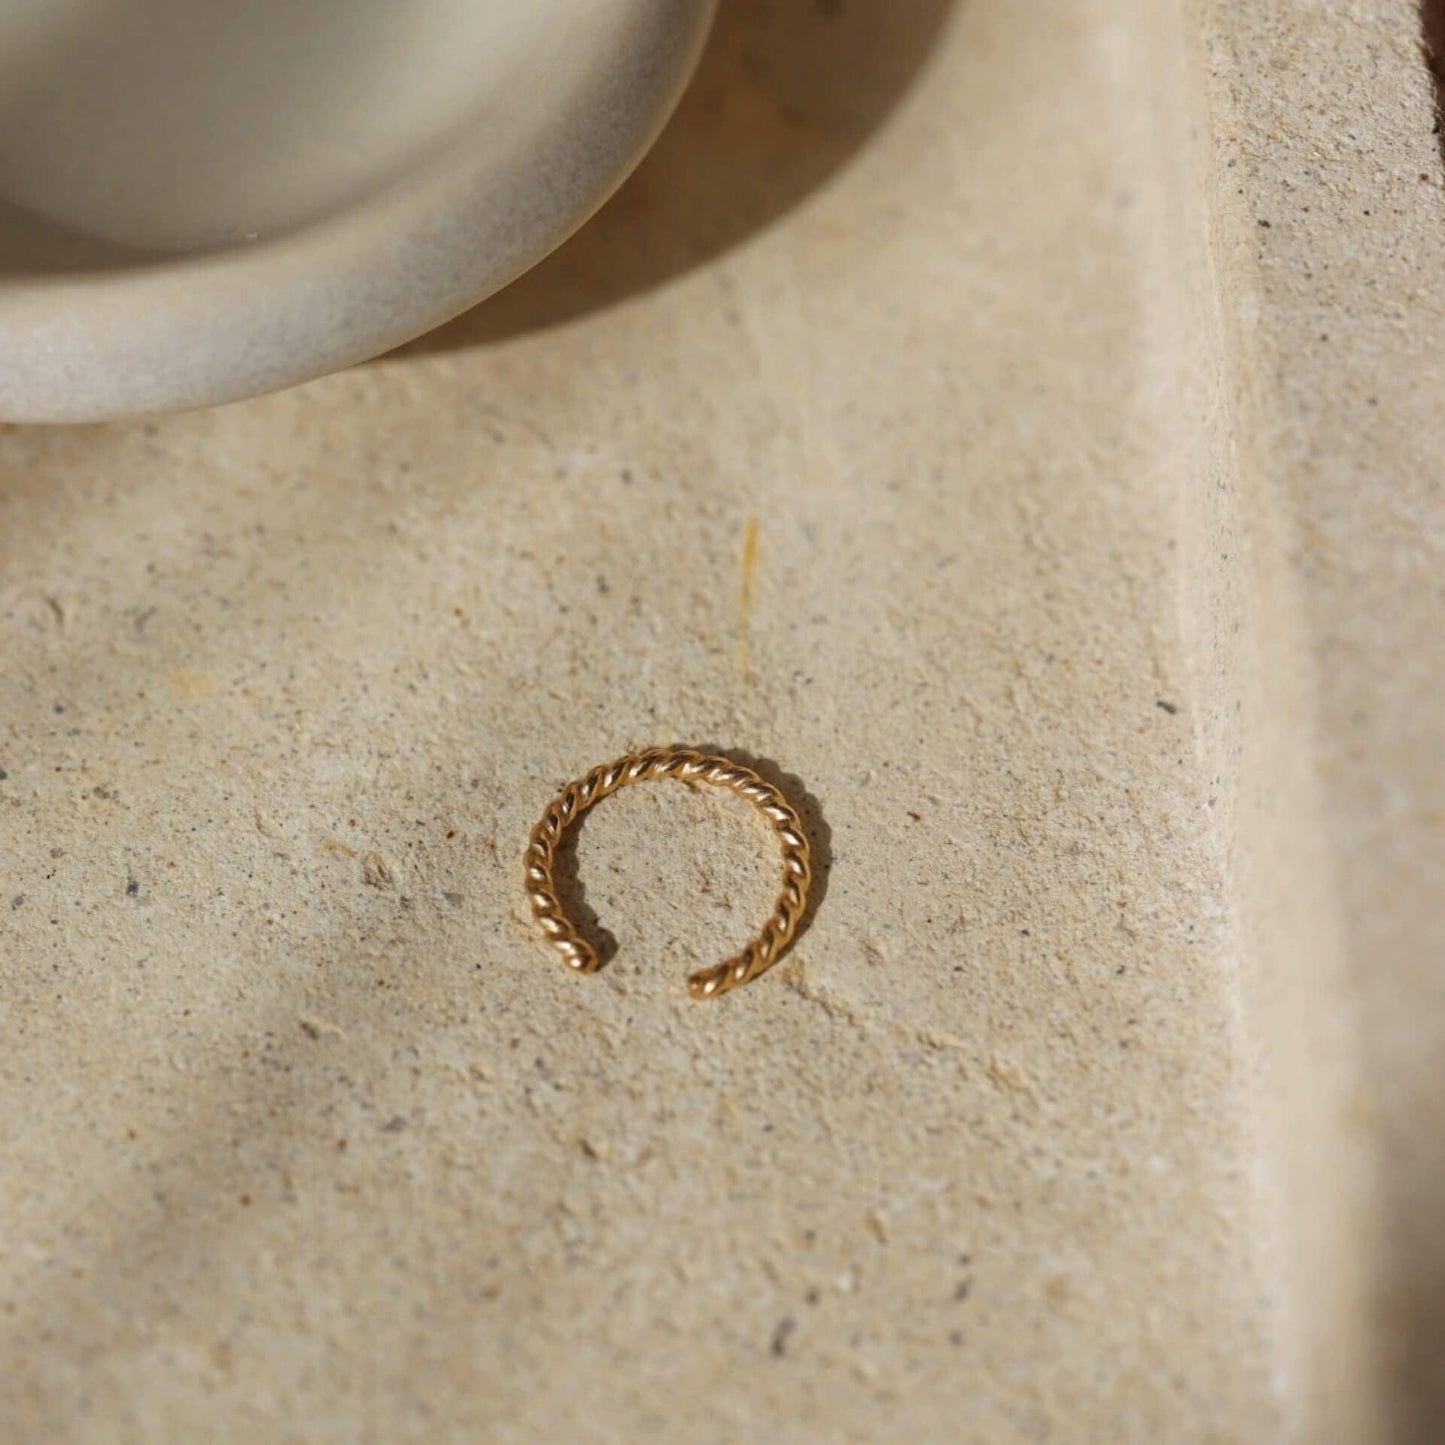 Load image into Gallery viewer, Spiral Ear Cuff: 14k Gold Fill - Echo Market
